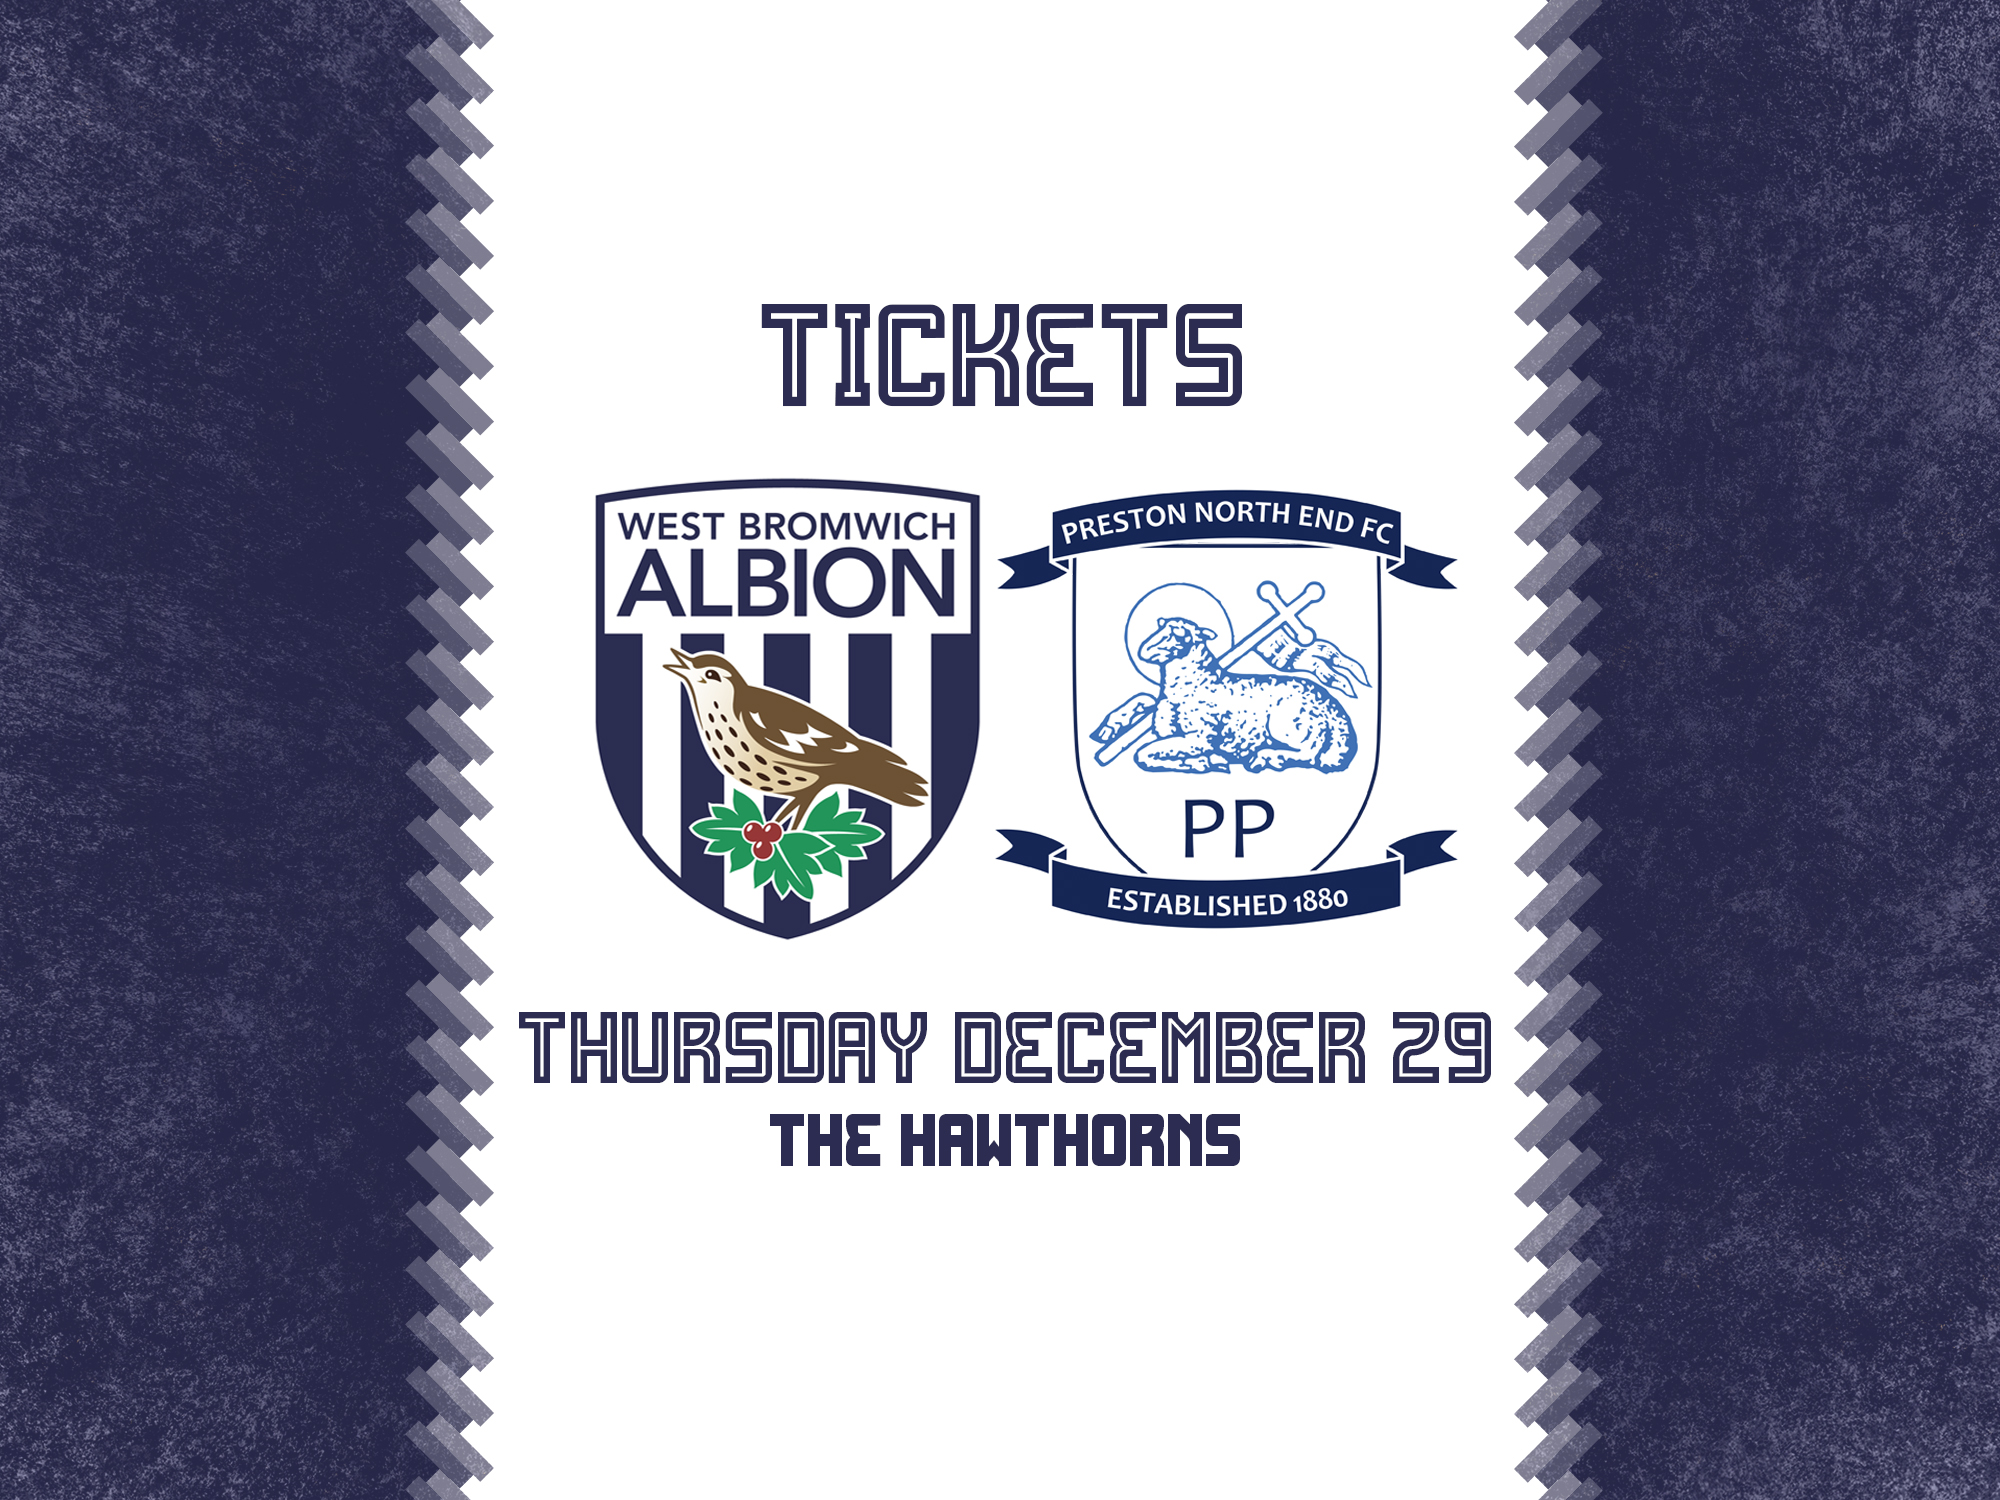 A ticket graphic advertising Albion's match against Preston